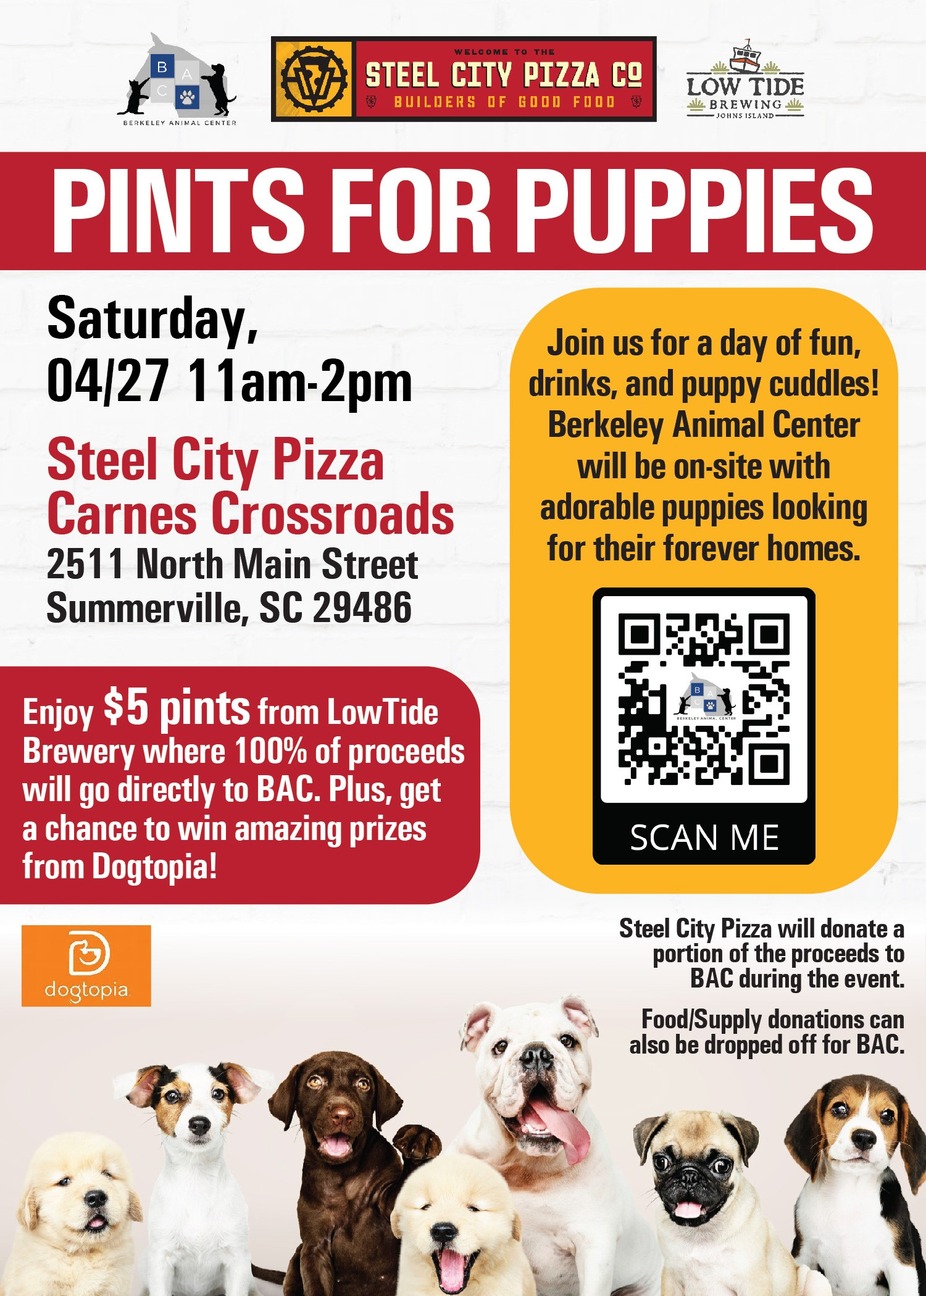 Puppies for Pints event photo